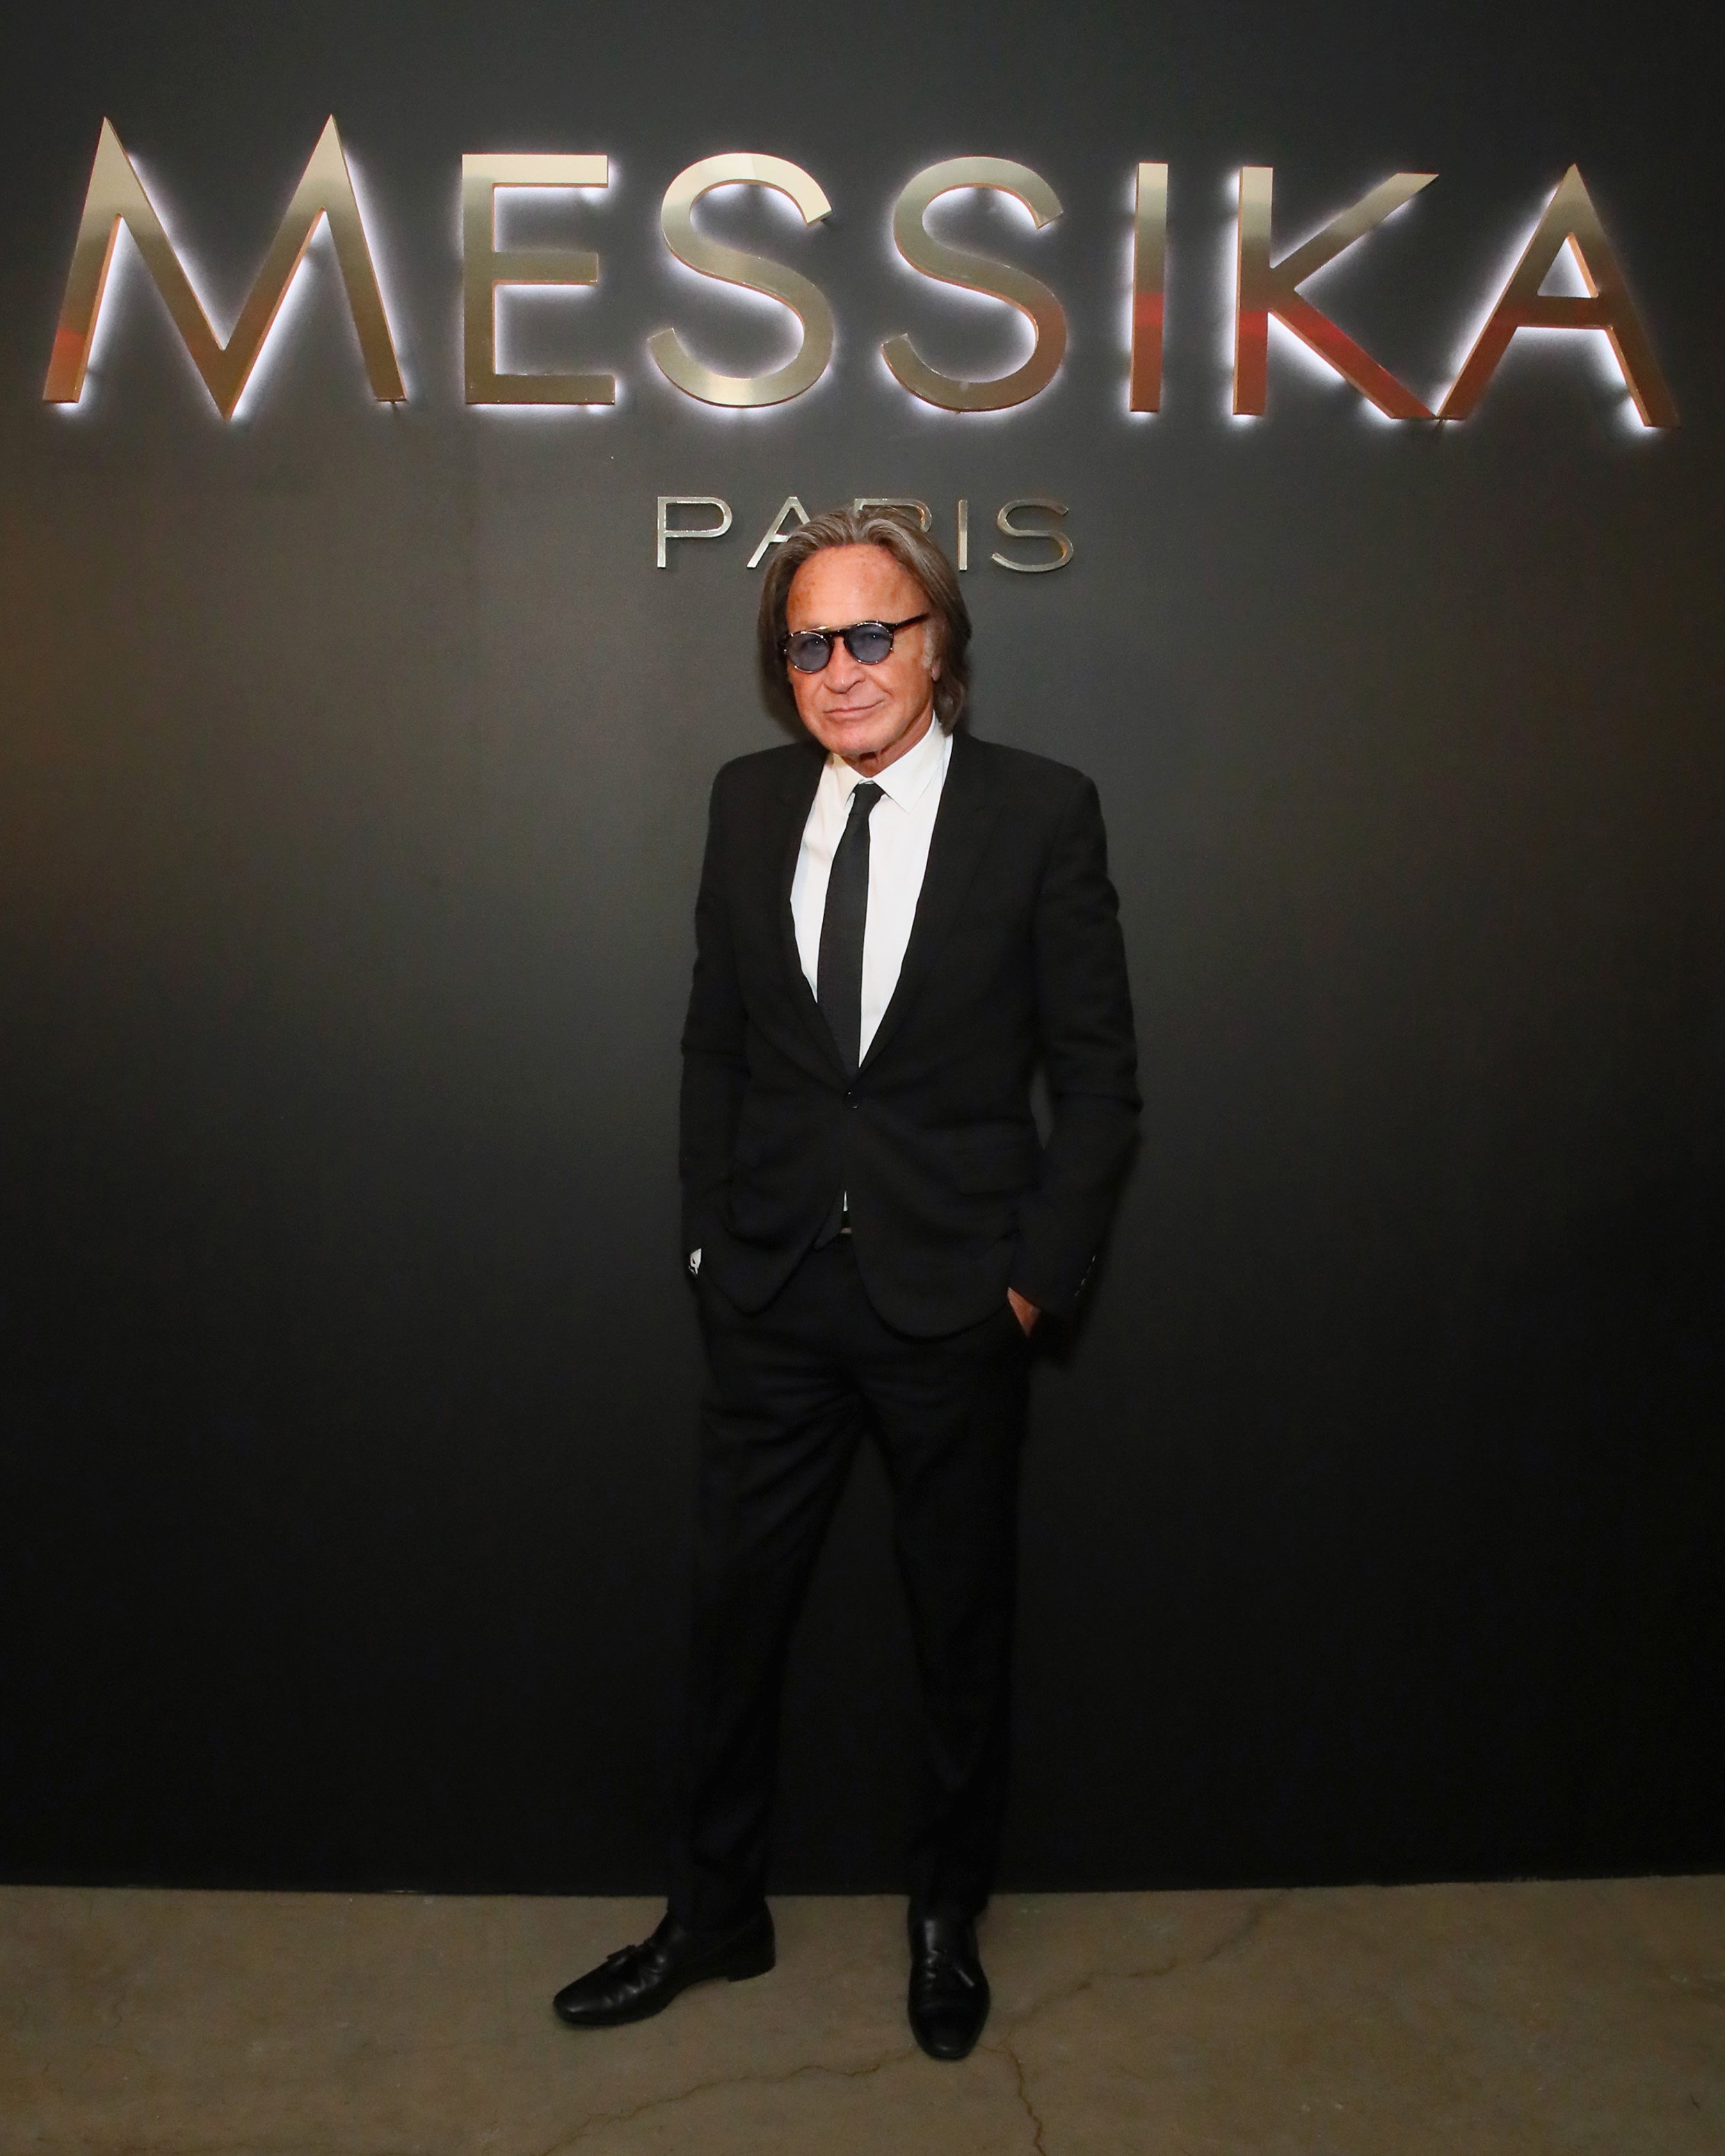  Mohamed Hadid attends NYC Fashion Week Spring/Summer 2019 Launch Of The Messika By Gigi Hadid at Milk Studios on September 12, 2018 in New York City | Photo: GettyImages